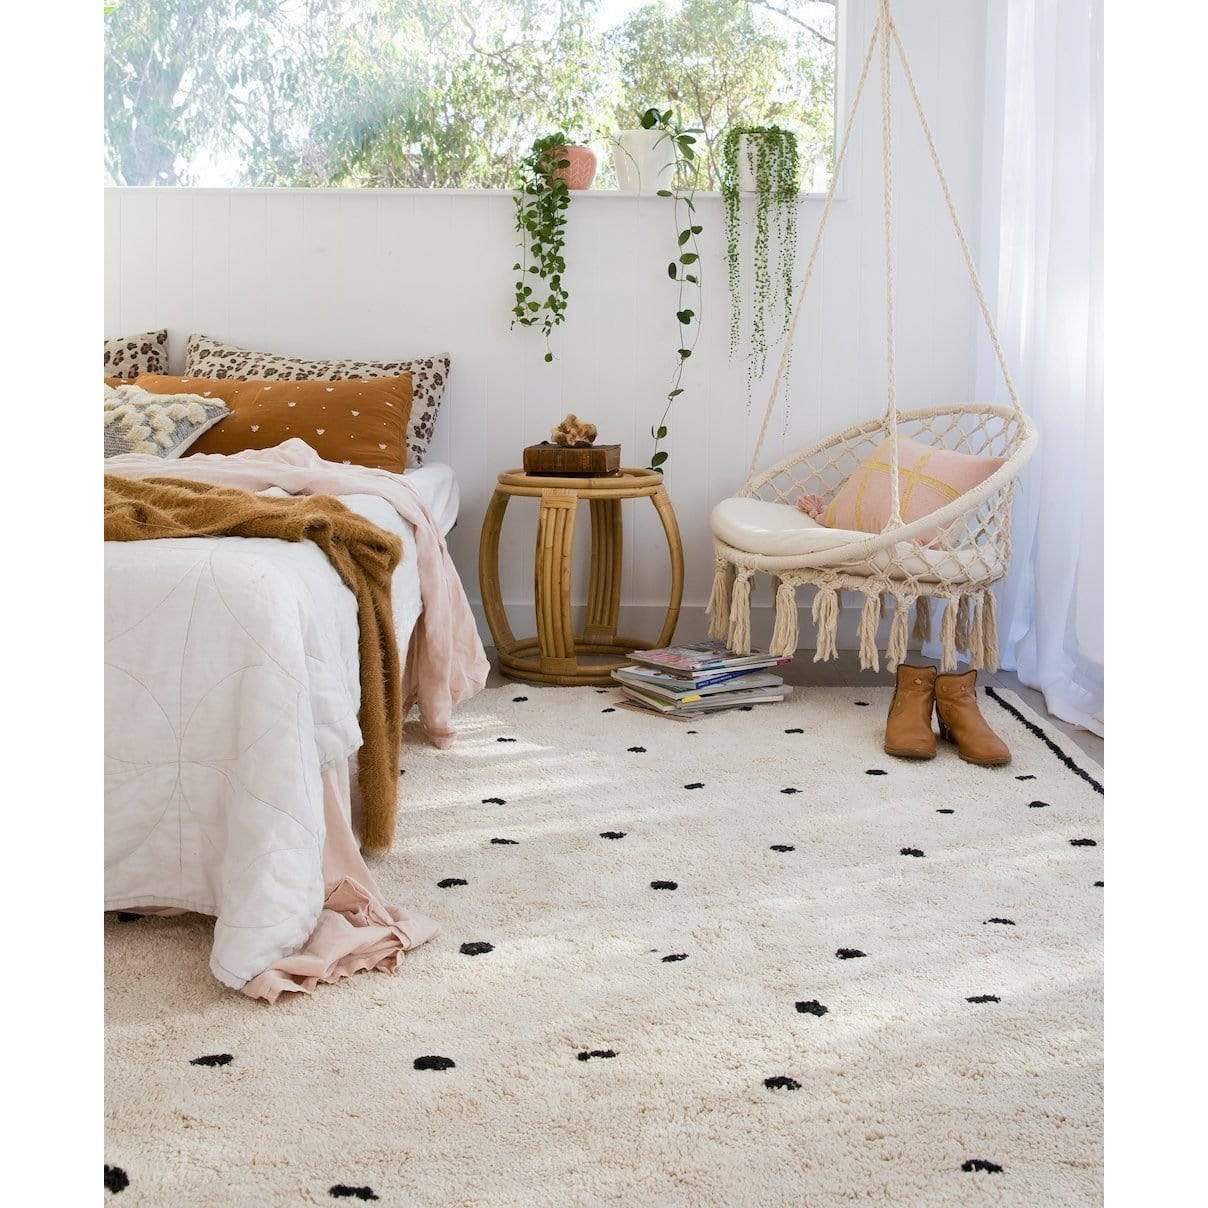 Steps Mat in Cream - Ethical Home Decor